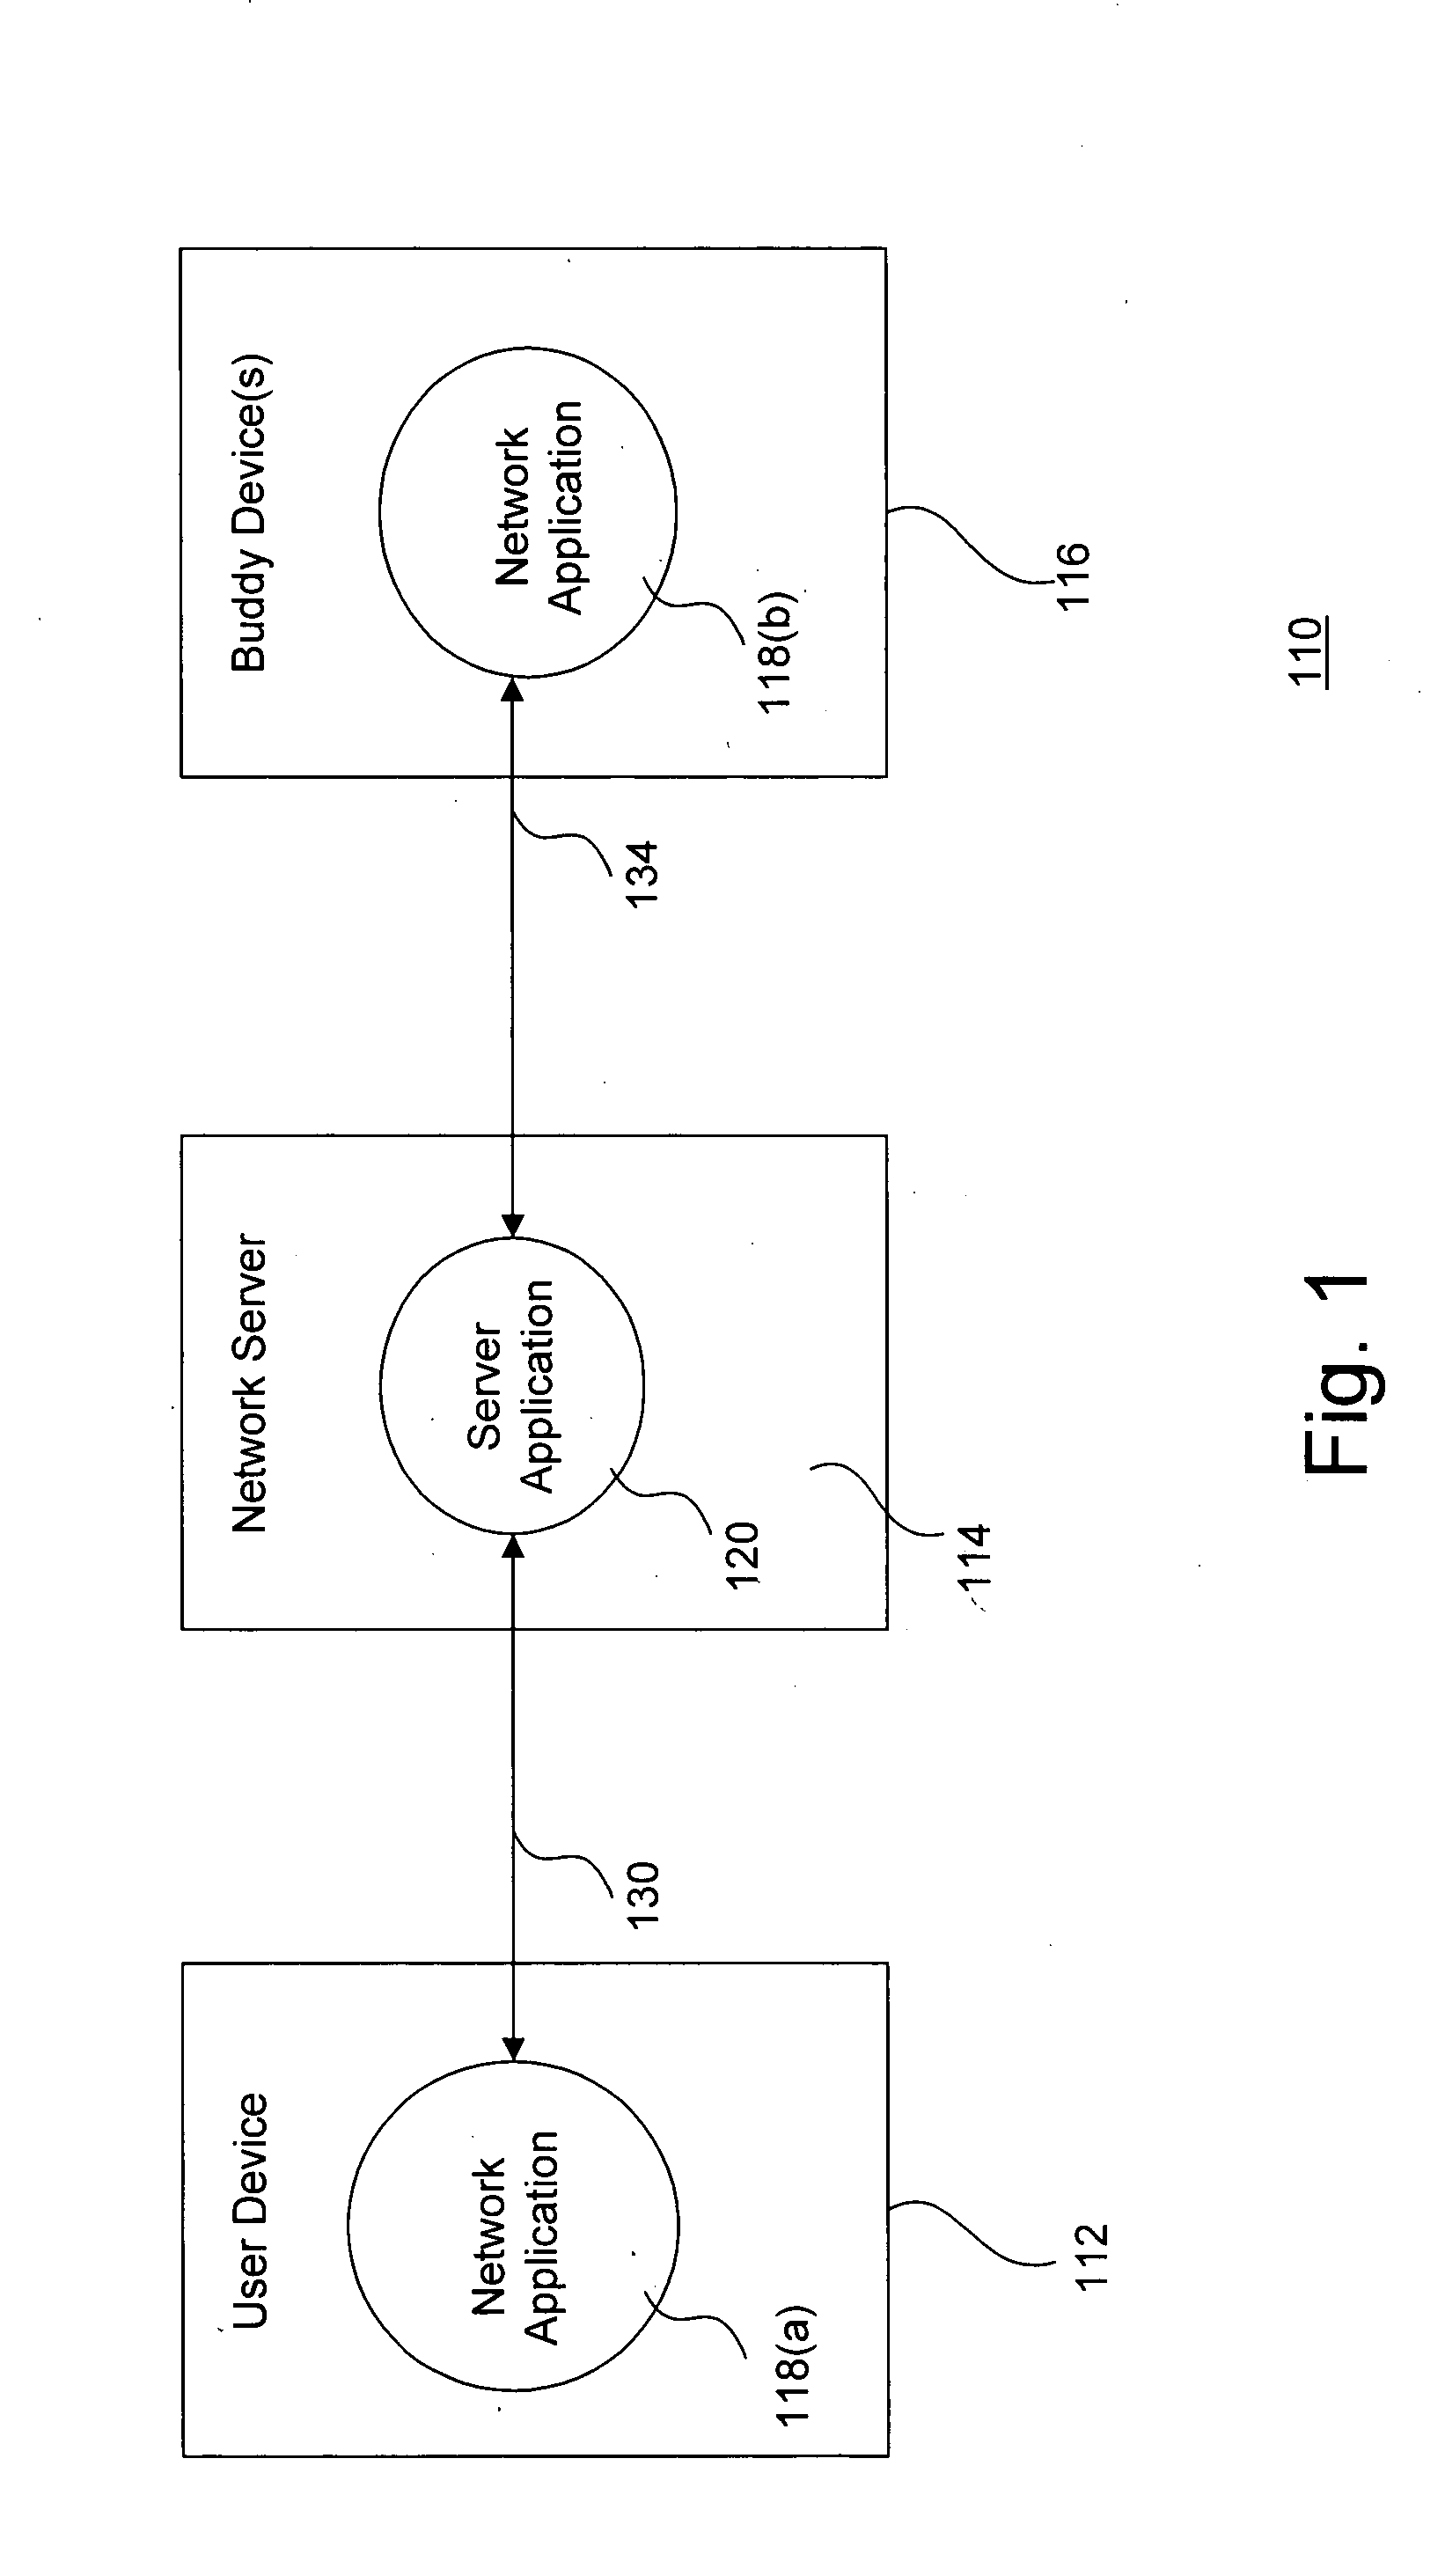 System and method for effectively implementing a dynamic user interface in an electronic network